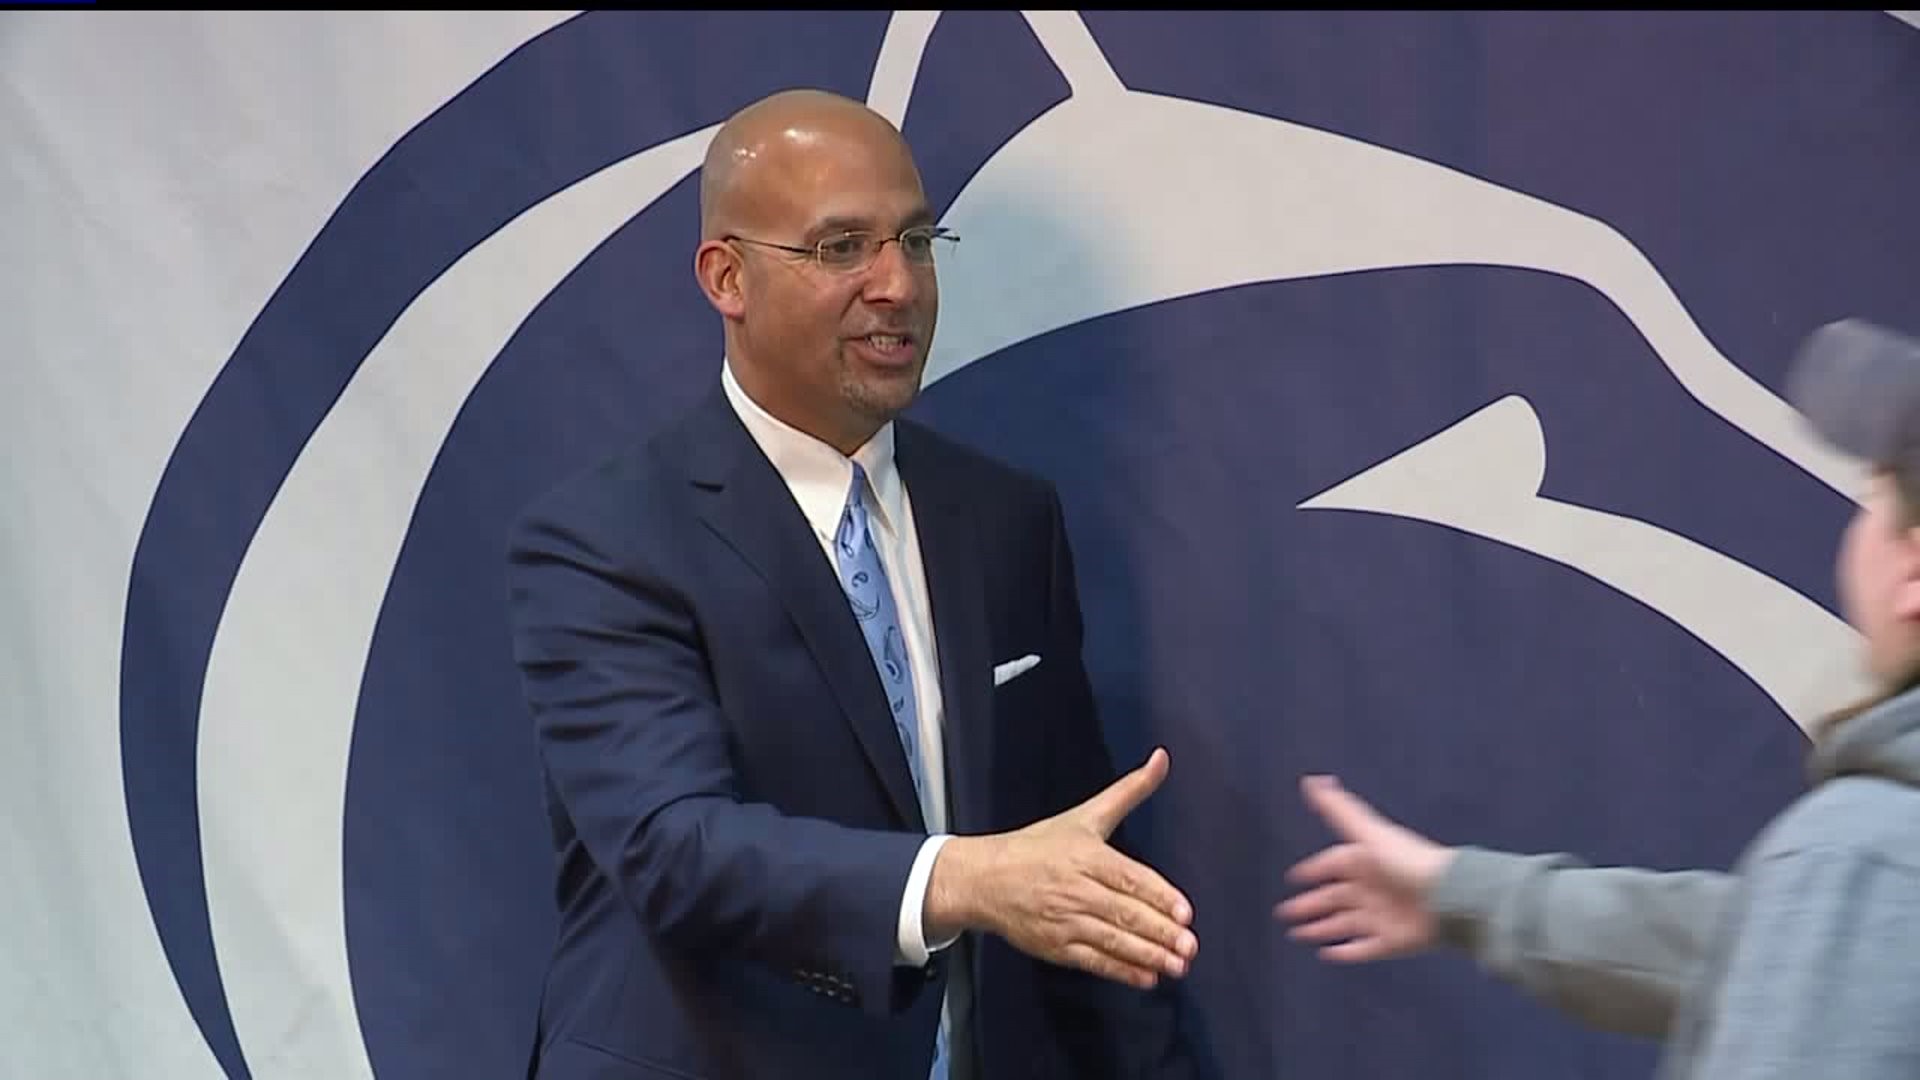 "A Night with James Franklin"